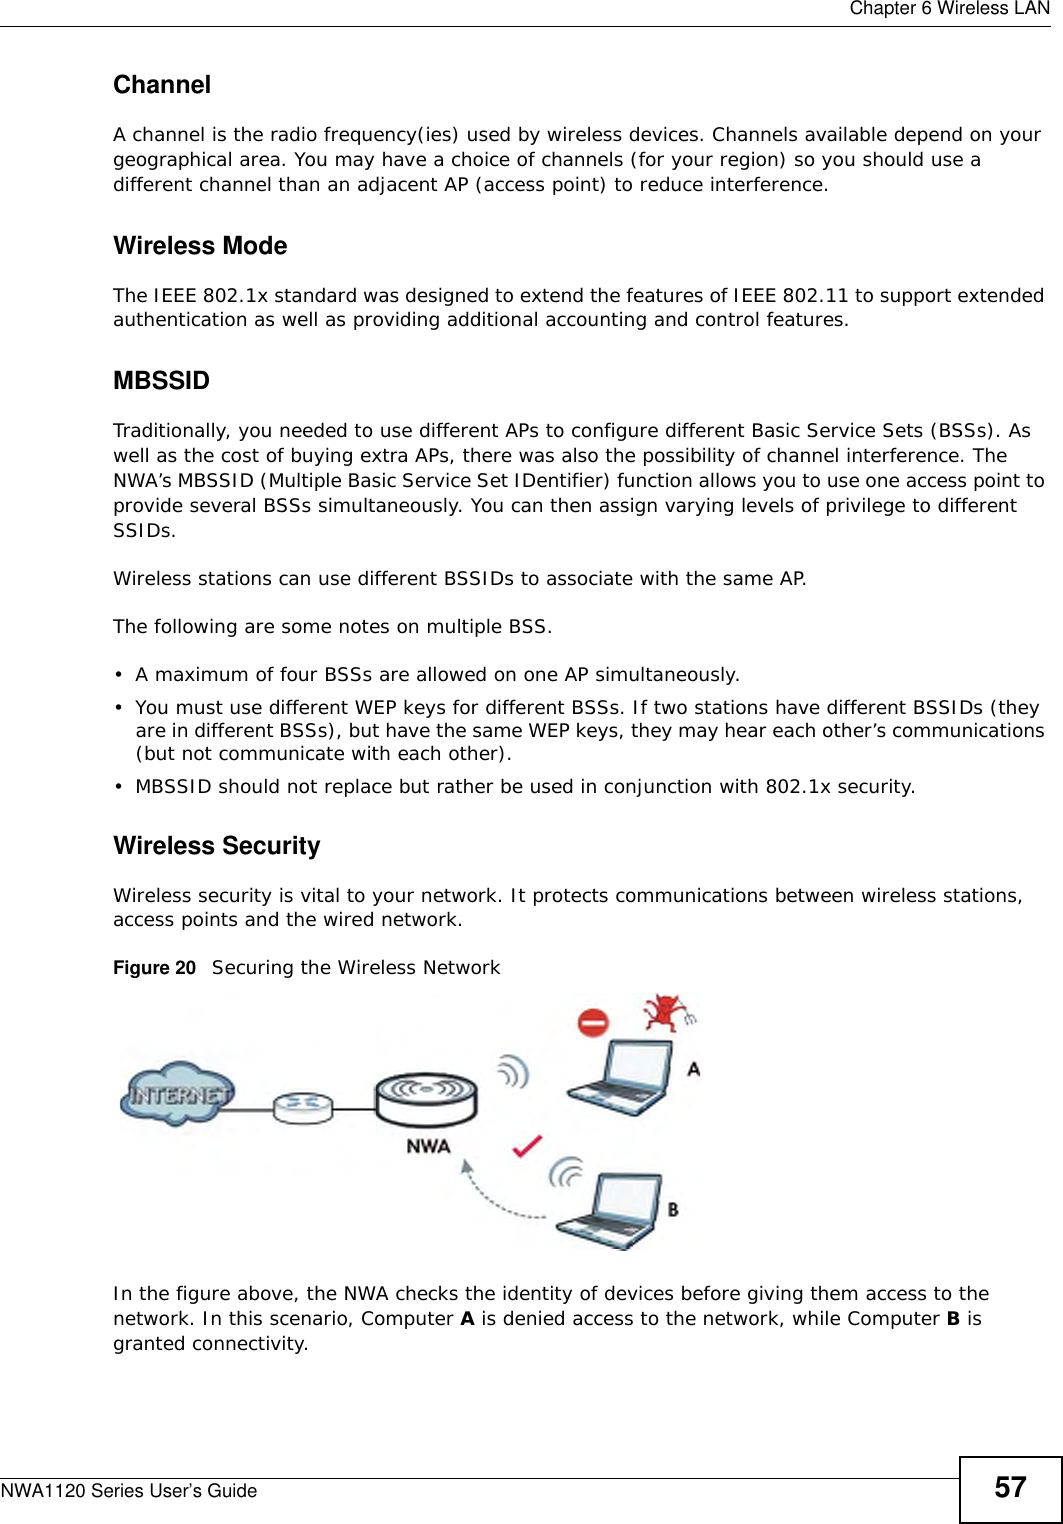  Chapter 6 Wireless LANNWA1120 Series User’s Guide 57ChannelA channel is the radio frequency(ies) used by wireless devices. Channels available depend on your geographical area. You may have a choice of channels (for your region) so you should use a different channel than an adjacent AP (access point) to reduce interference.Wireless ModeThe IEEE 802.1x standard was designed to extend the features of IEEE 802.11 to support extended authentication as well as providing additional accounting and control features. MBSSIDTraditionally, you needed to use different APs to configure different Basic Service Sets (BSSs). As well as the cost of buying extra APs, there was also the possibility of channel interference. The NWA’s MBSSID (Multiple Basic Service Set IDentifier) function allows you to use one access point to provide several BSSs simultaneously. You can then assign varying levels of privilege to different SSIDs.Wireless stations can use different BSSIDs to associate with the same AP. The following are some notes on multiple BSS. • A maximum of four BSSs are allowed on one AP simultaneously.• You must use different WEP keys for different BSSs. If two stations have different BSSIDs (they are in different BSSs), but have the same WEP keys, they may hear each other’s communications (but not communicate with each other).• MBSSID should not replace but rather be used in conjunction with 802.1x security.Wireless SecurityWireless security is vital to your network. It protects communications between wireless stations, access points and the wired network. Figure 20   Securing the Wireless NetworkIn the figure above, the NWA checks the identity of devices before giving them access to the network. In this scenario, Computer A is denied access to the network, while Computer B is granted connectivity.